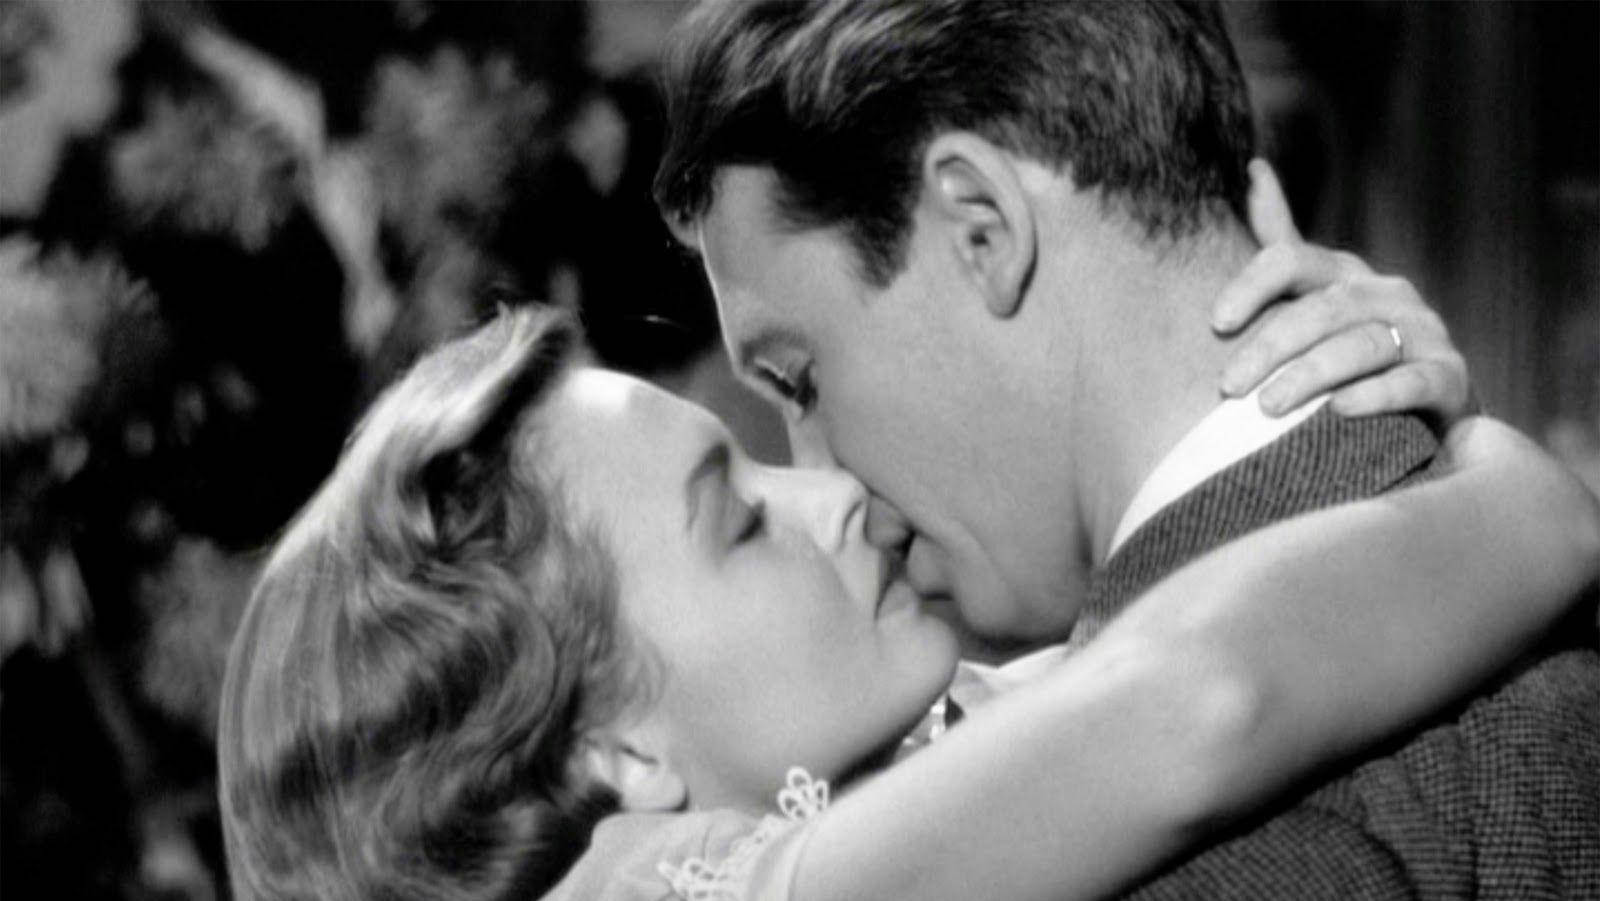 Caption: A timeless moment of love between George and Mary in "It's a Wonderful Life" Wallpaper